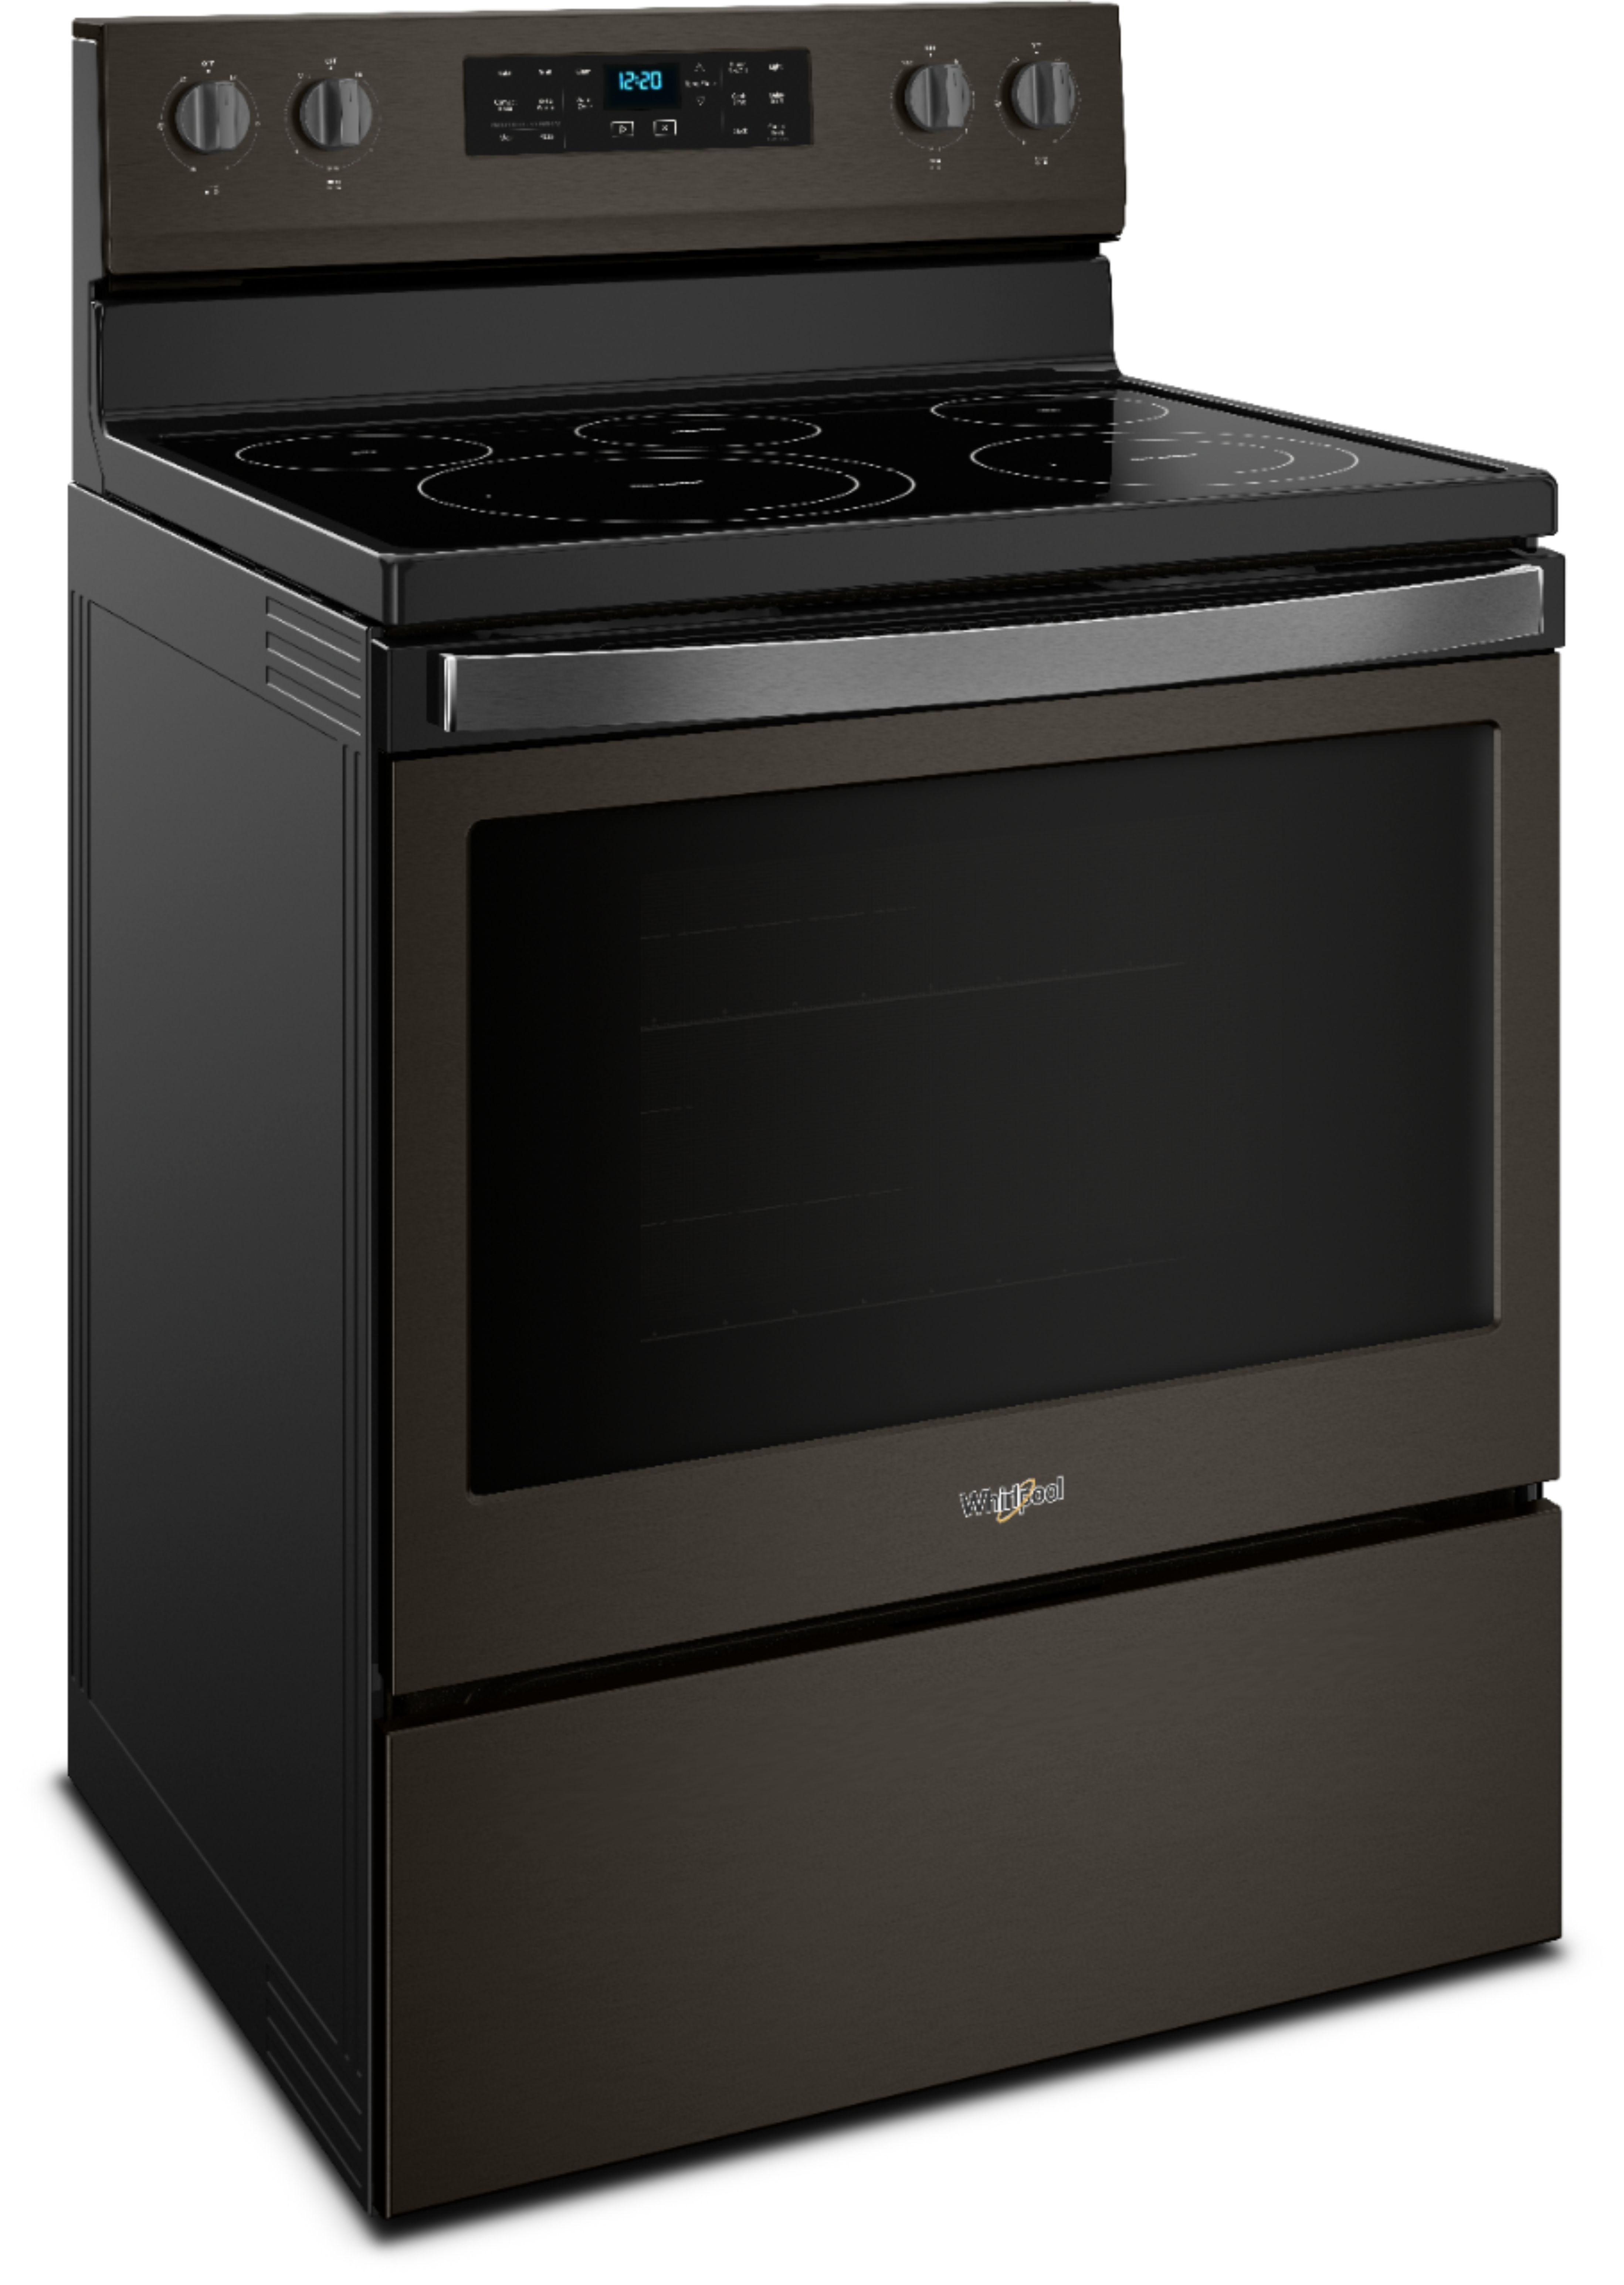 Angle View: GE - 5.3 Cu. Ft. Freestanding Electric Convection Range with Self-Cleaning and No-Preheat Air Fry - Black slate